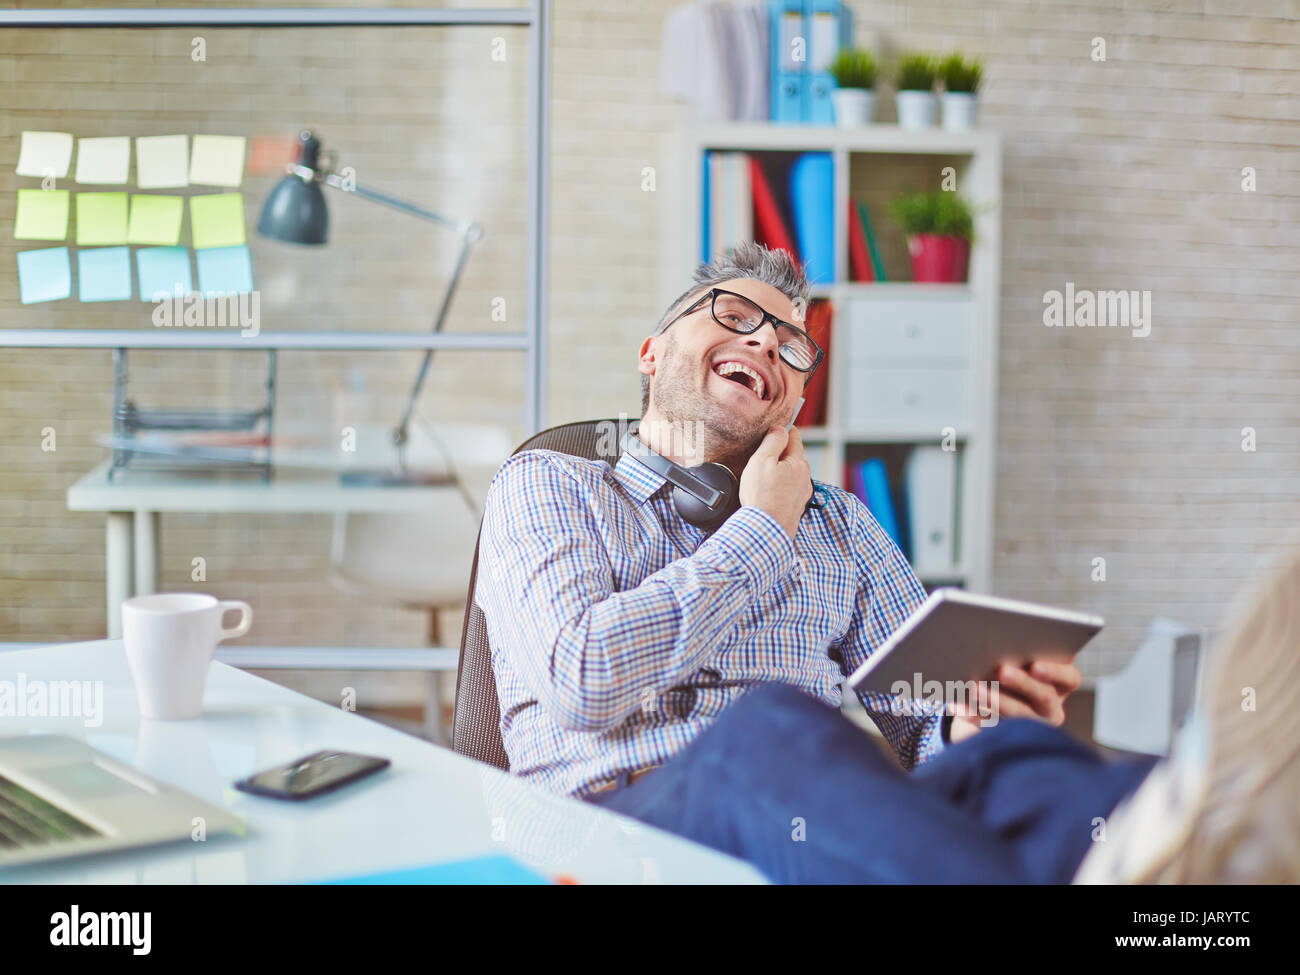 Laughing businessman on phone Stock Photo